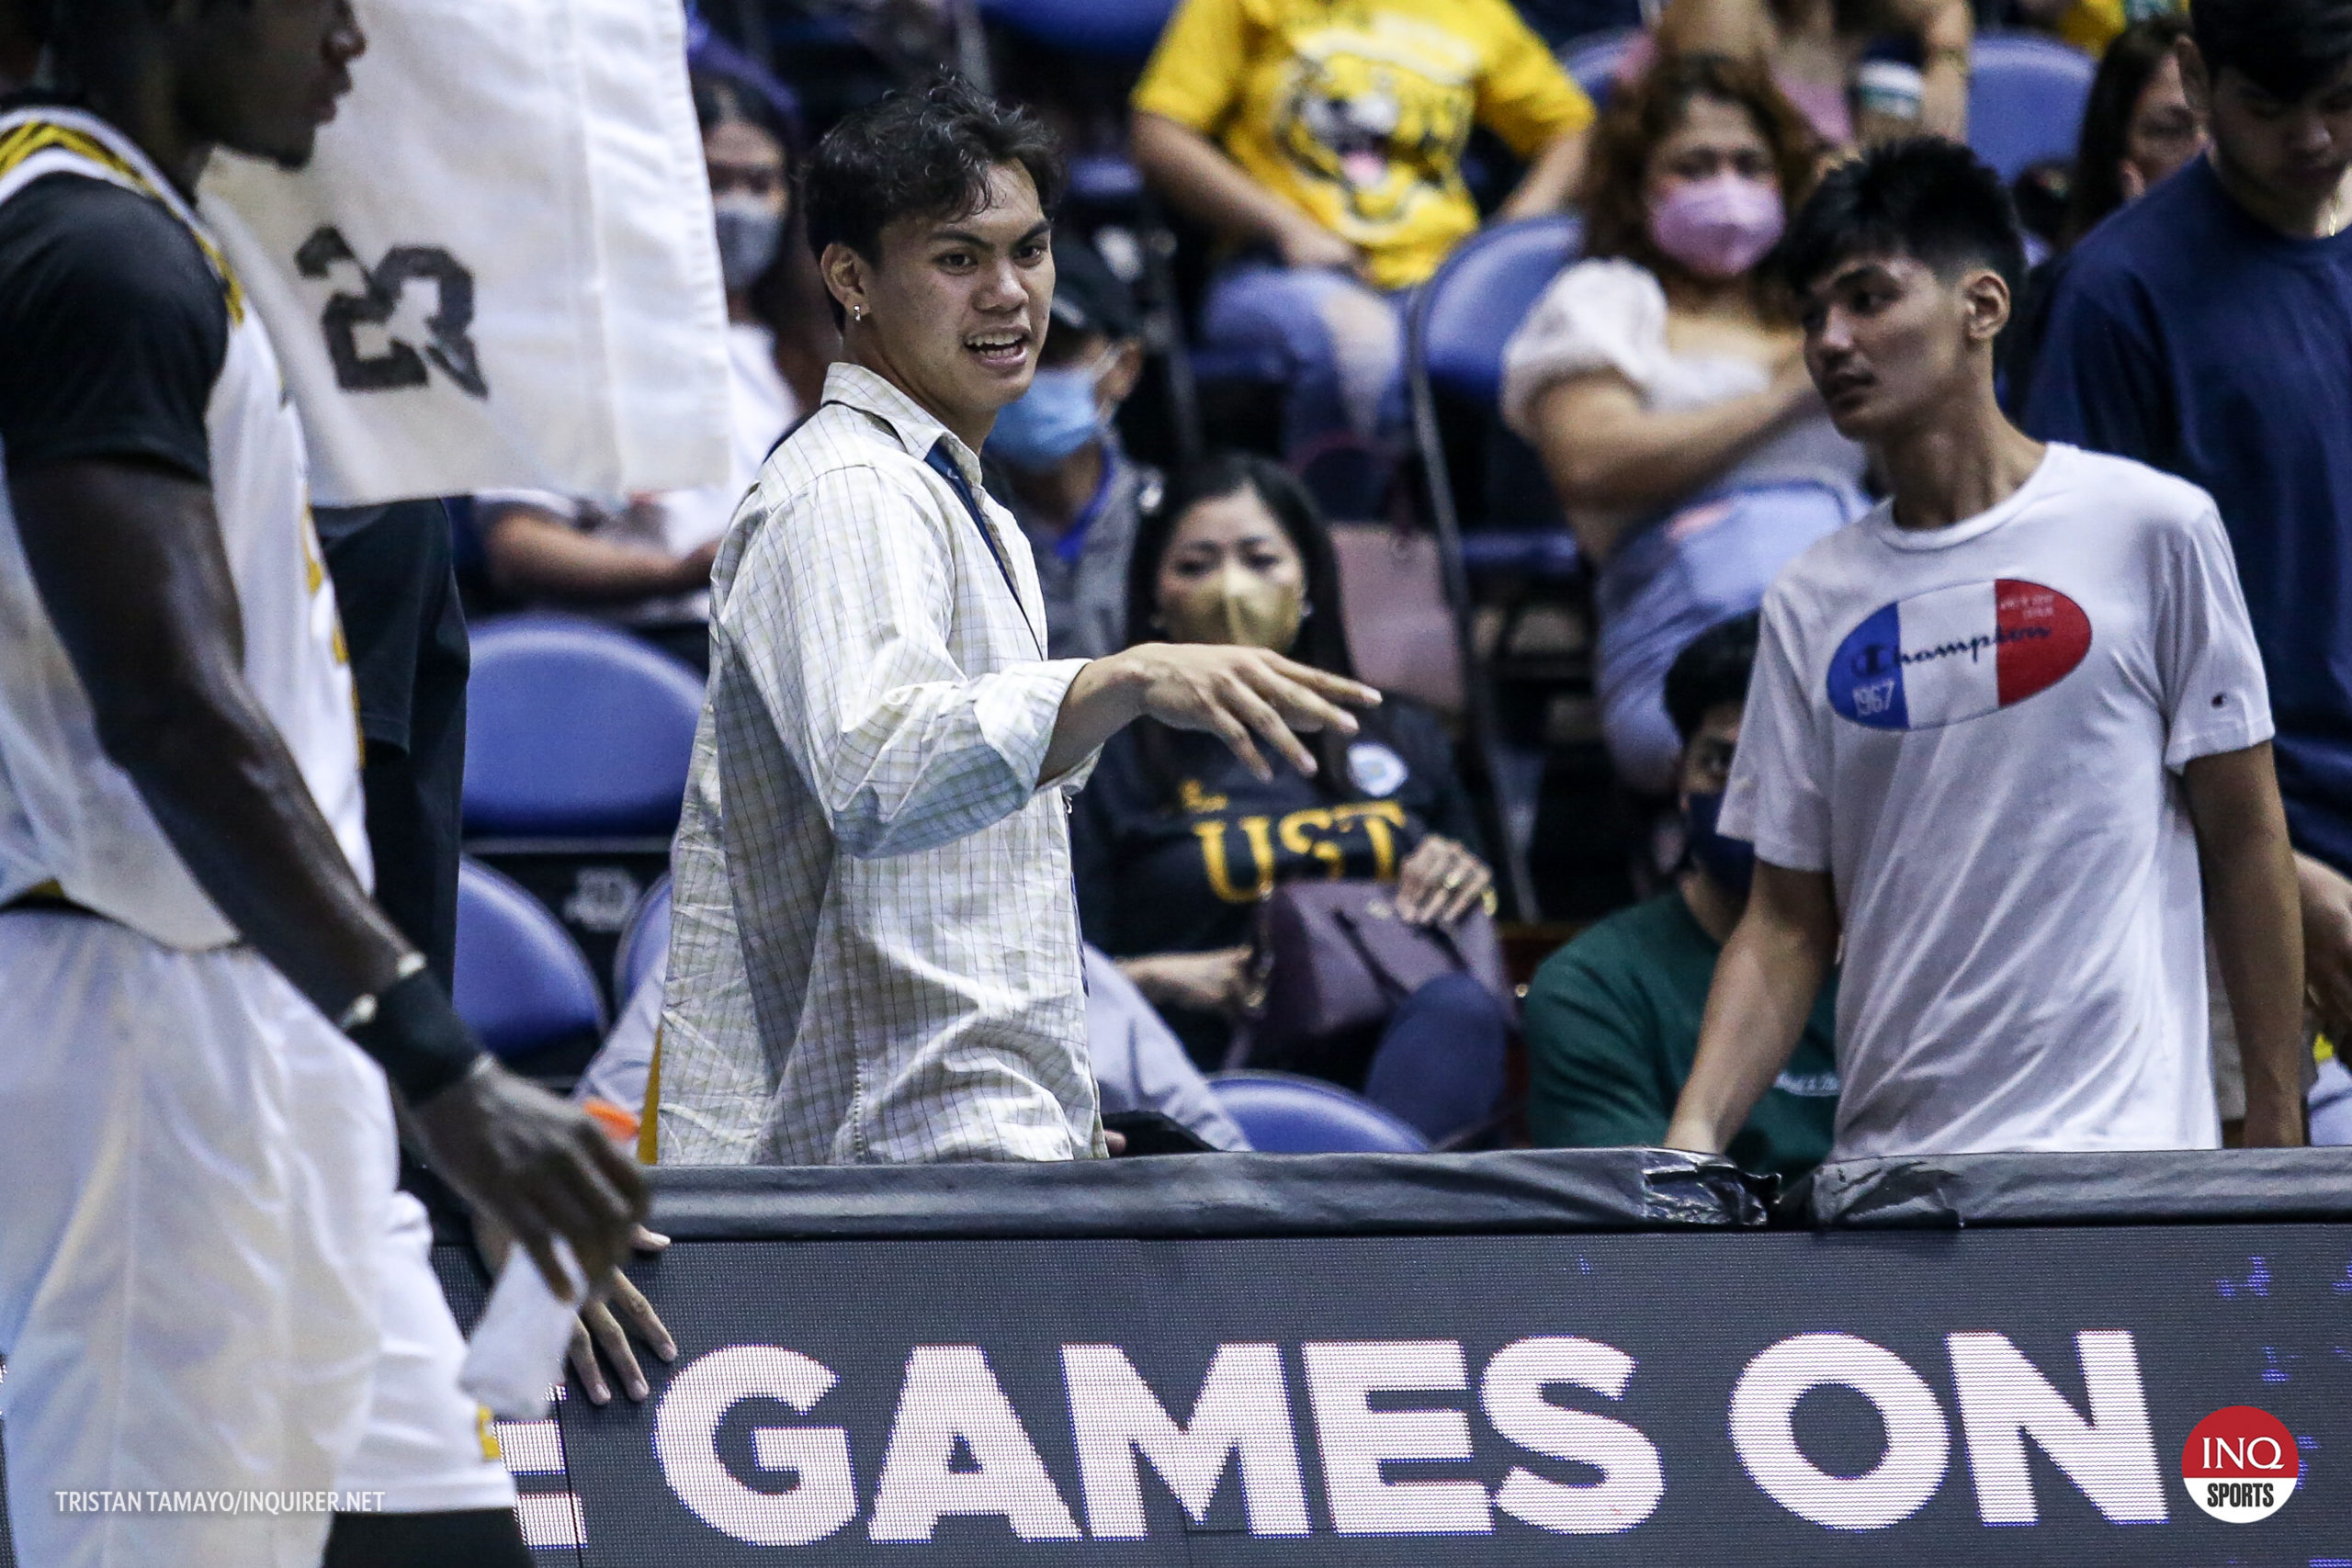 Nic Cabanero UST The Roaring Tigers UAAP Part 85